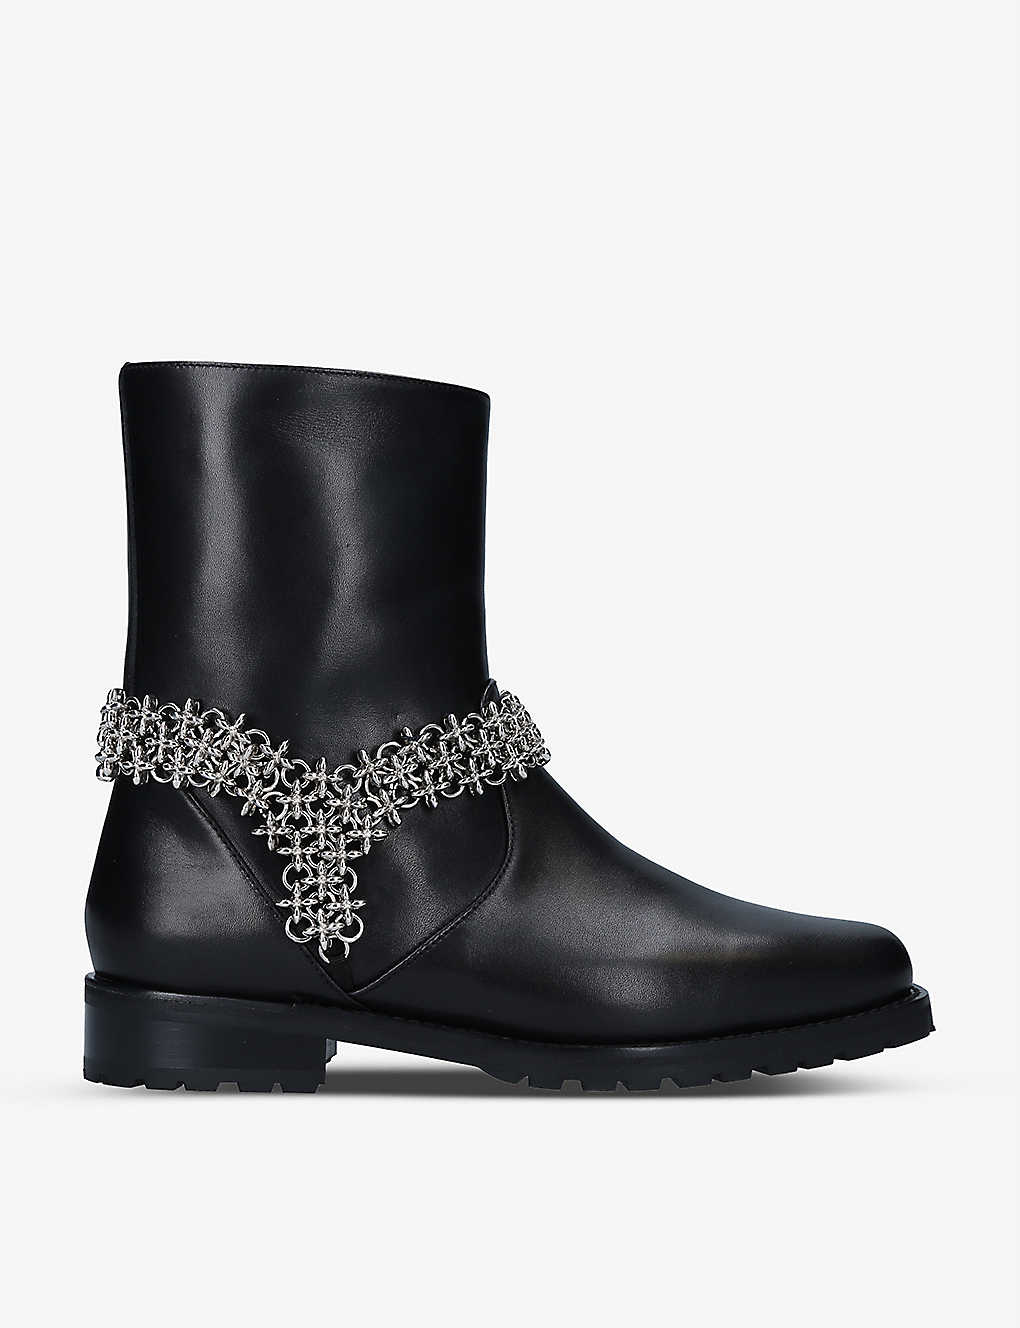 Marisco chain-embellished leather biker boots(9350692)